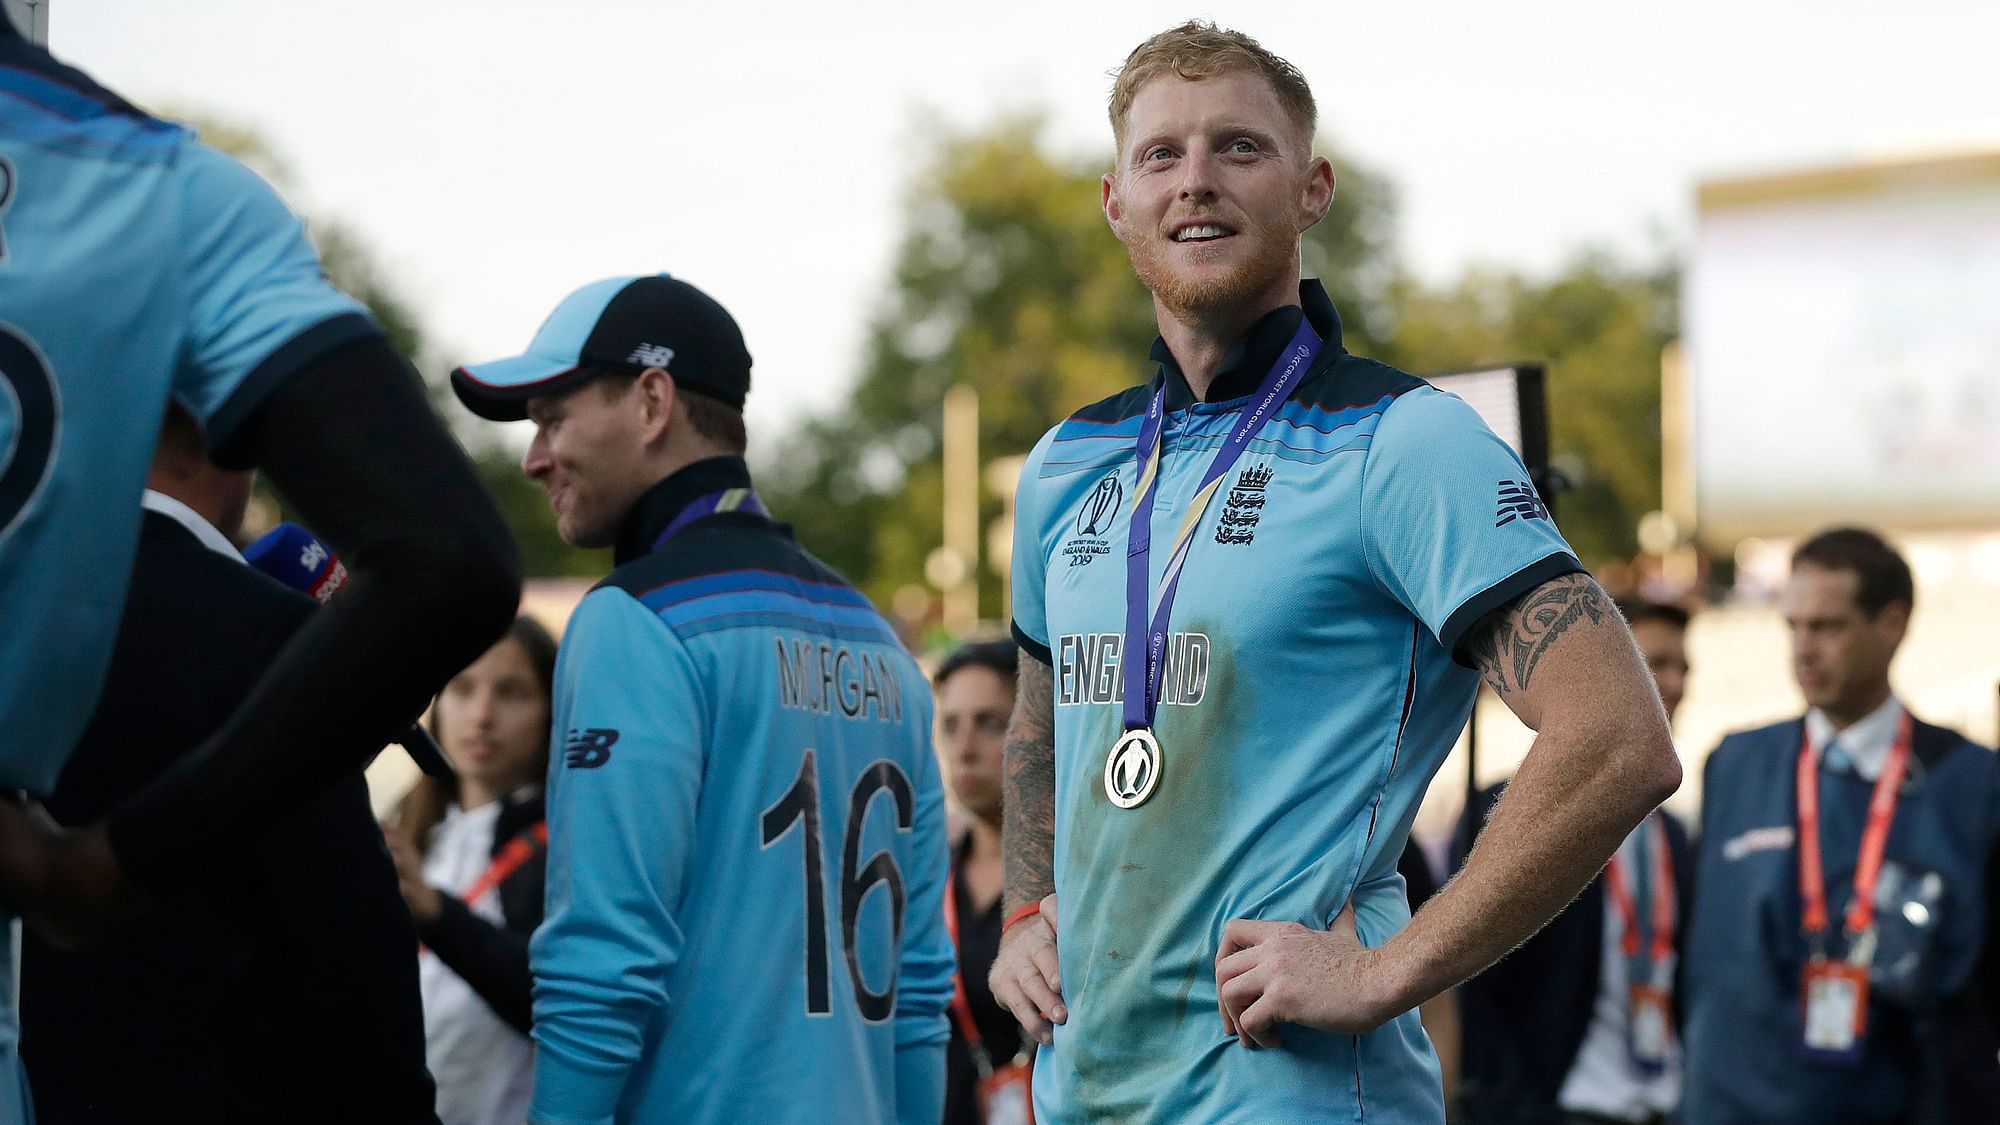 The hosts won what Stokes described as the “best-ever” final on superior boundary count.